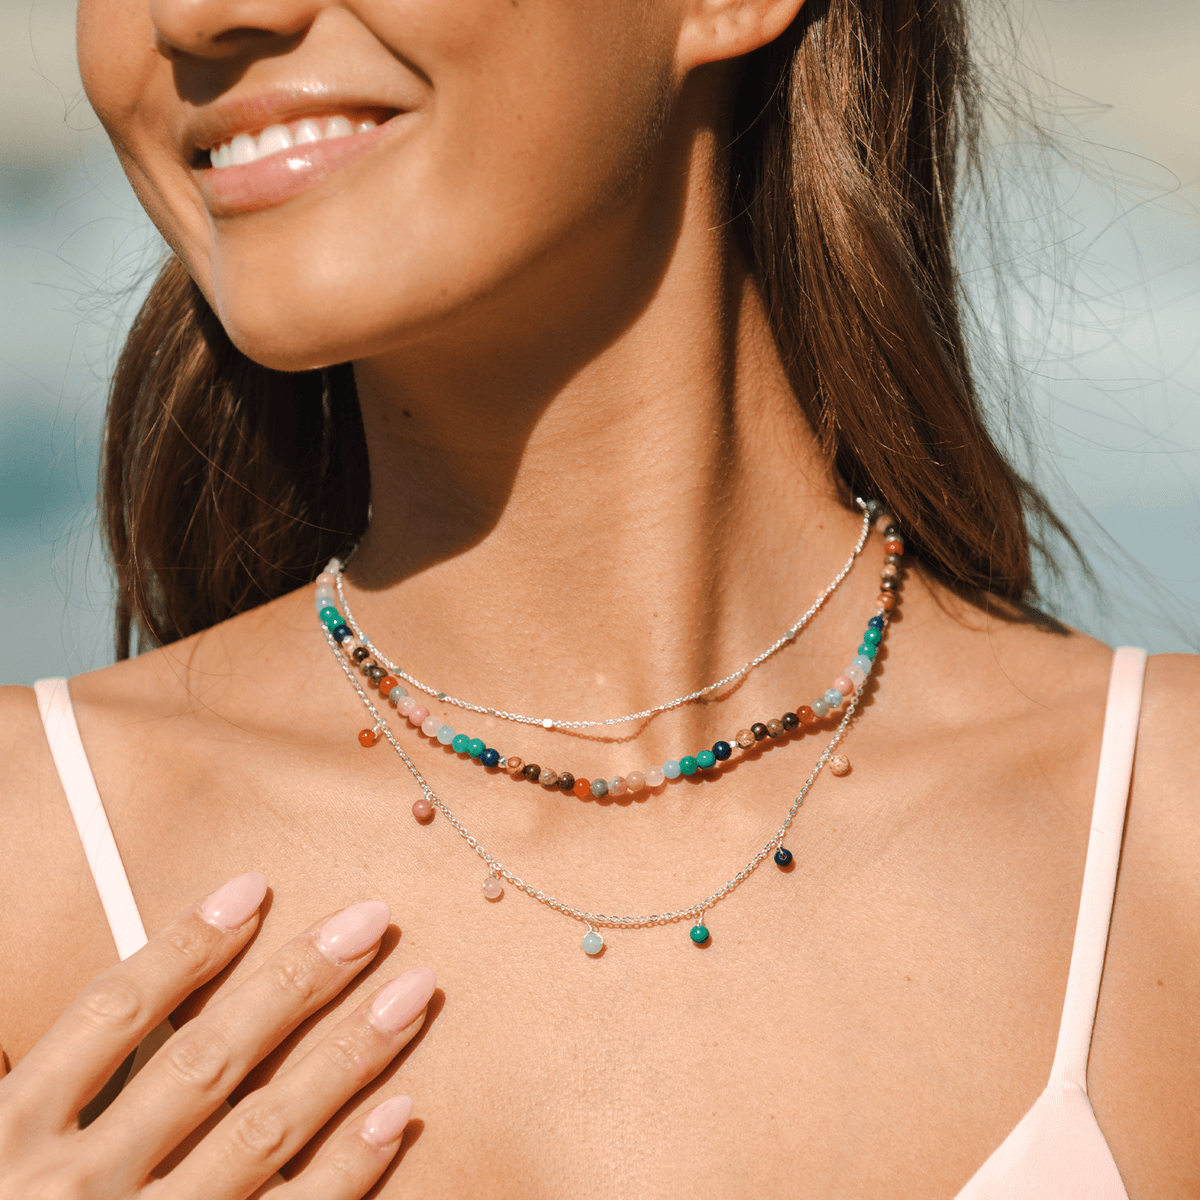 Master Healer Dewdrop + Circles in the Sand Necklace Stack